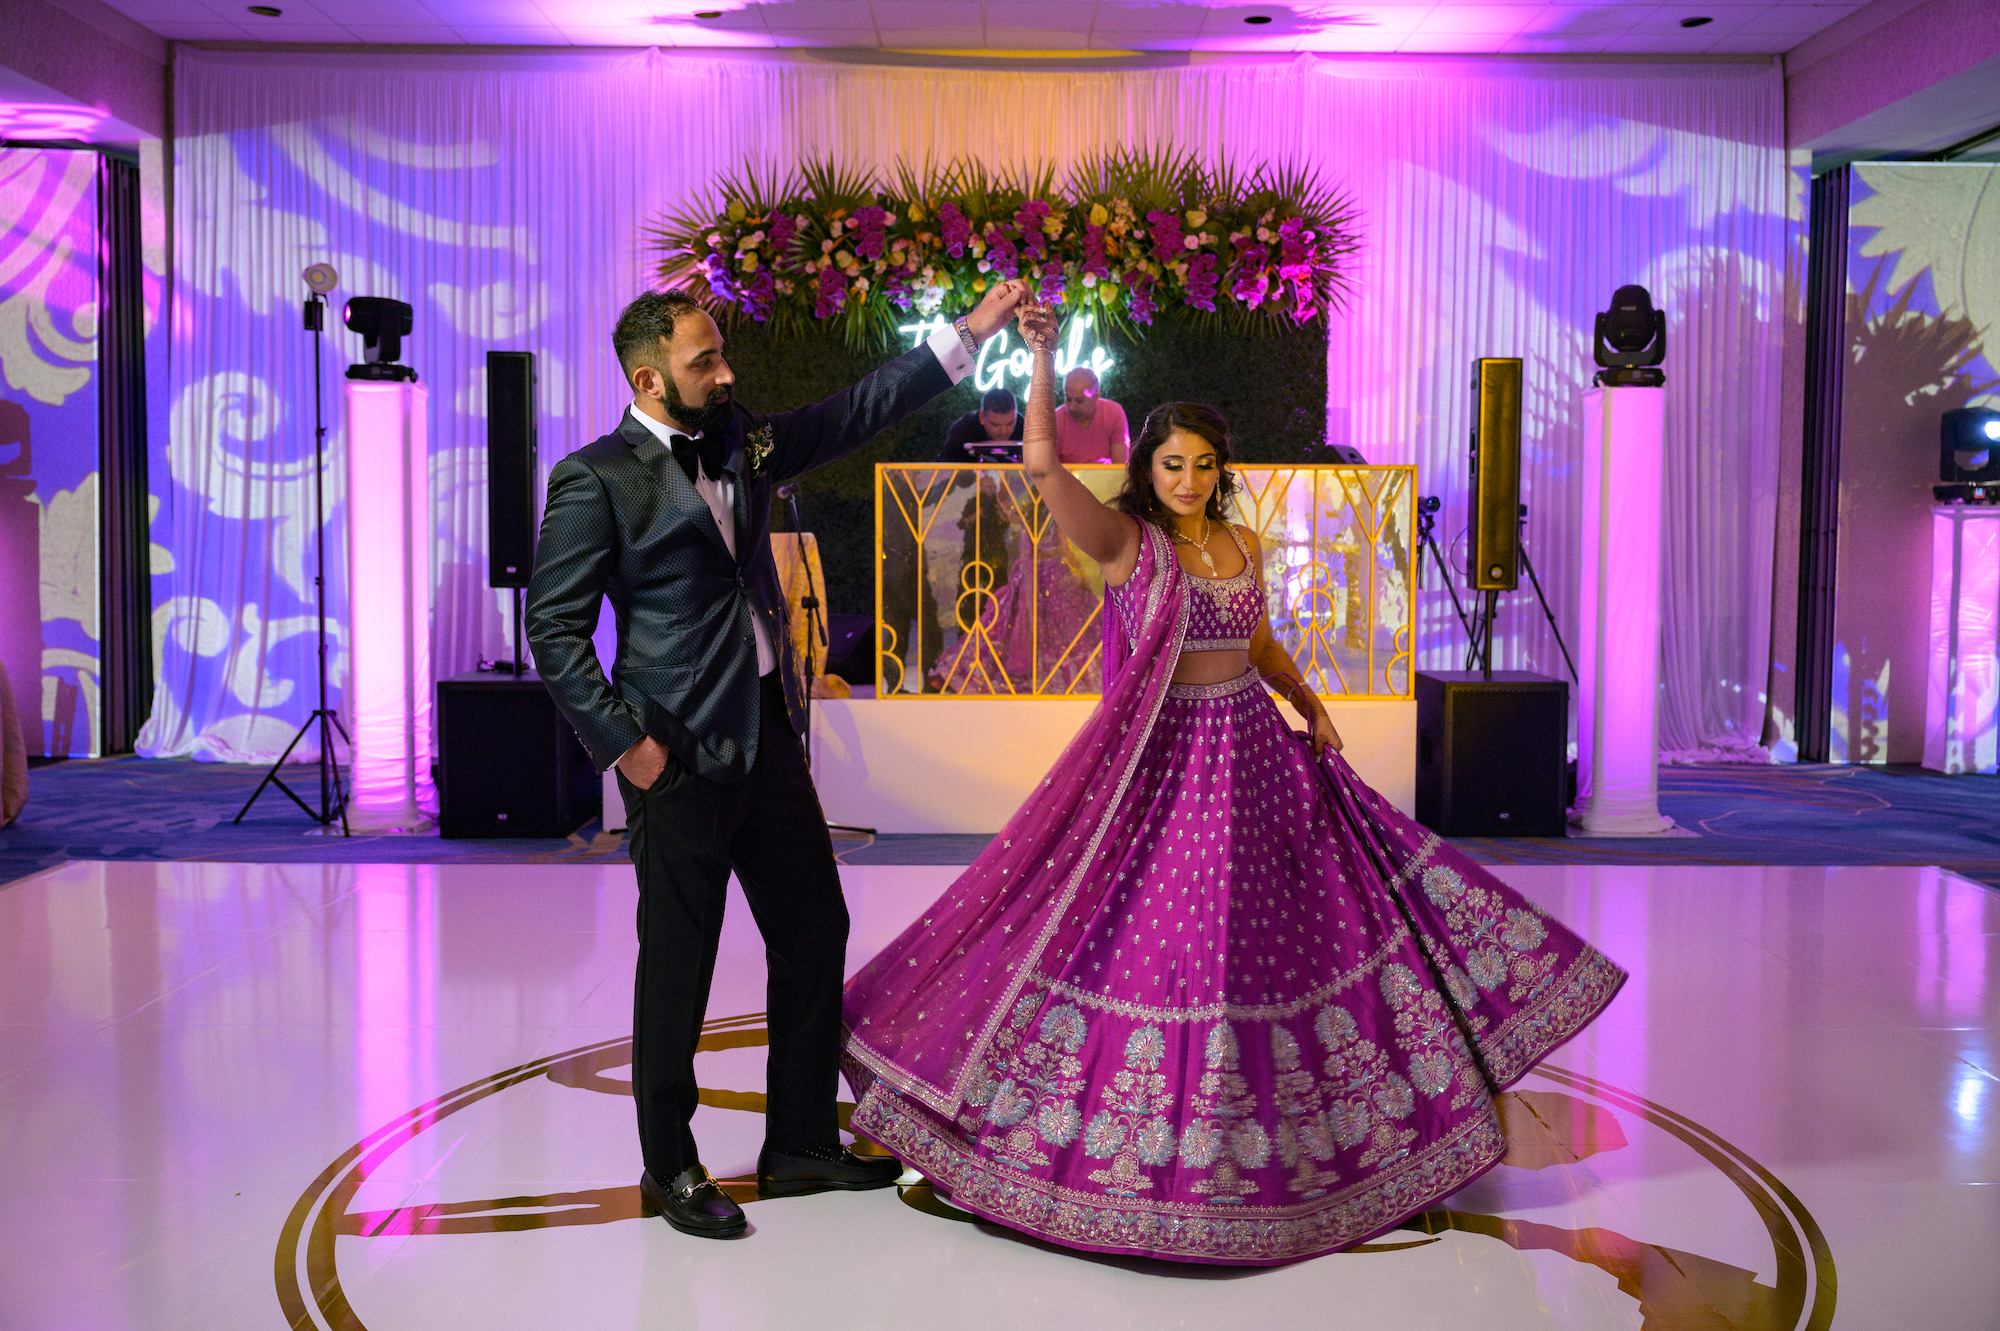 Indian Bride and Groom at First Dance on Luxurious All White Dance Floor with Gold Monogram, Bride Wearing Traditional Indian Fuchsia Lehenga and Groom Wearing Modern Black Tuxedo | Tampa Bay Hotel Venue Hilton Clearwater Beach Resort and Spa